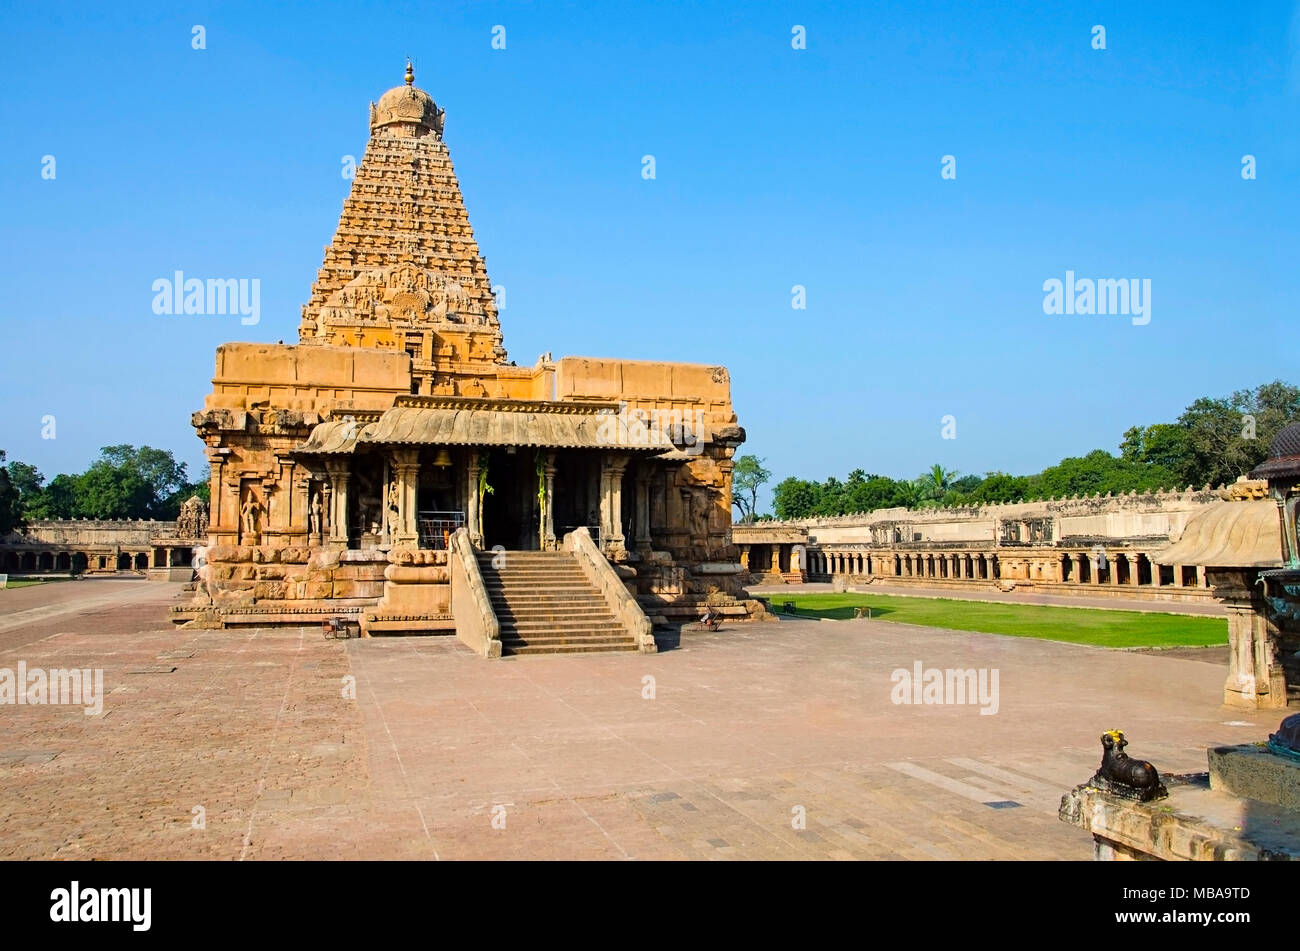 Brihadishvara Temple, Thanjavur, Tamil Nadu, India. Hindu temple dedicated to Lord Shiva, it is one of the largest South Indian temple and an exemplar Stock Photo